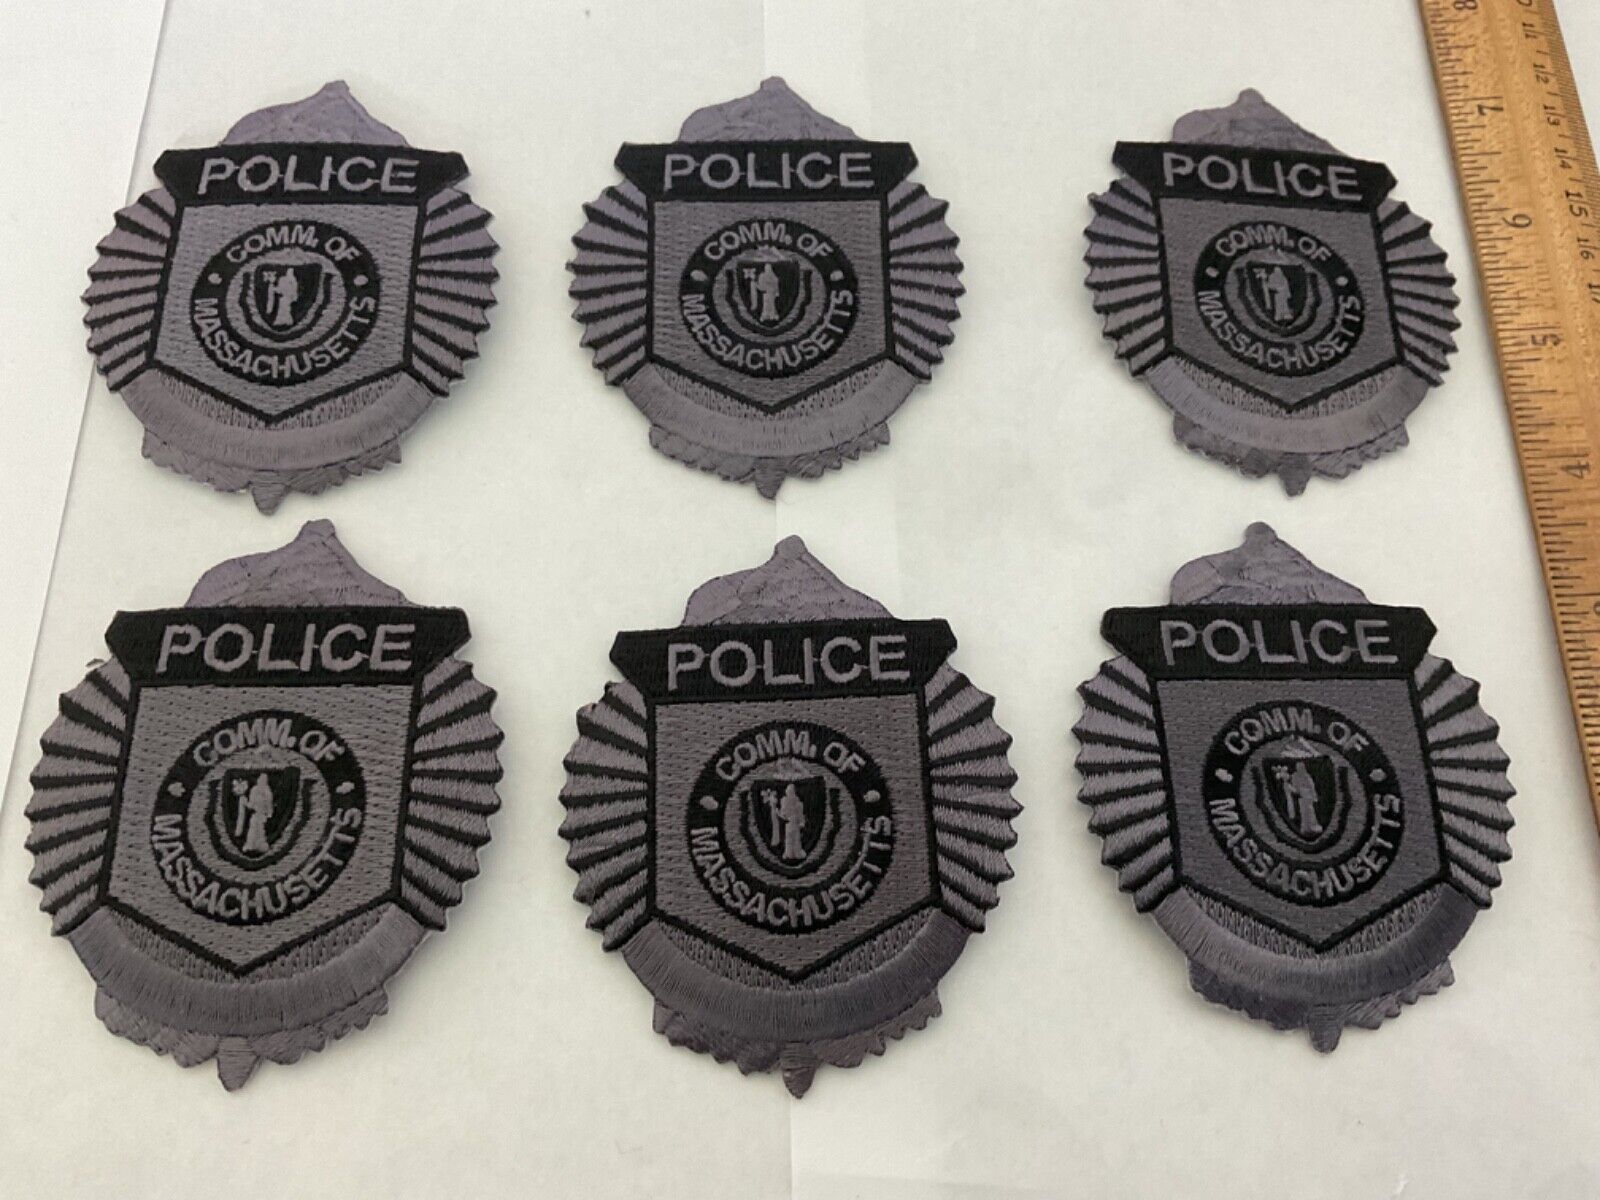 POLICE Comm.Of Massachusetts Badge Subdued collectable patches 6 pieces